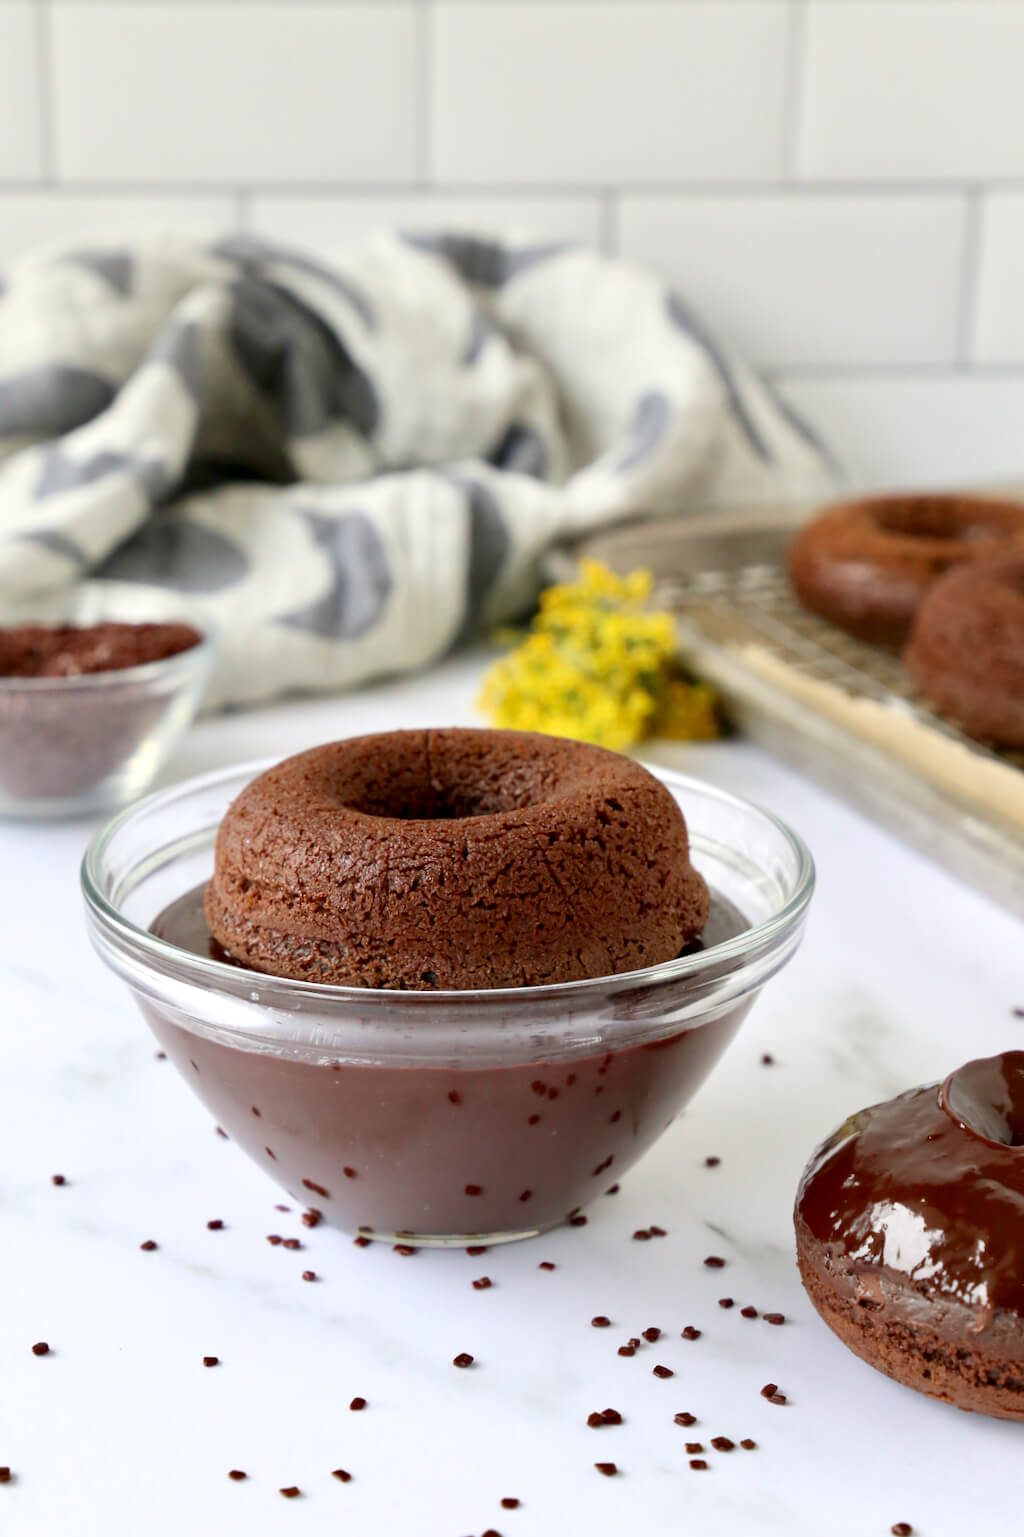 a bake donut dipped in a bowl of chocolate ganache